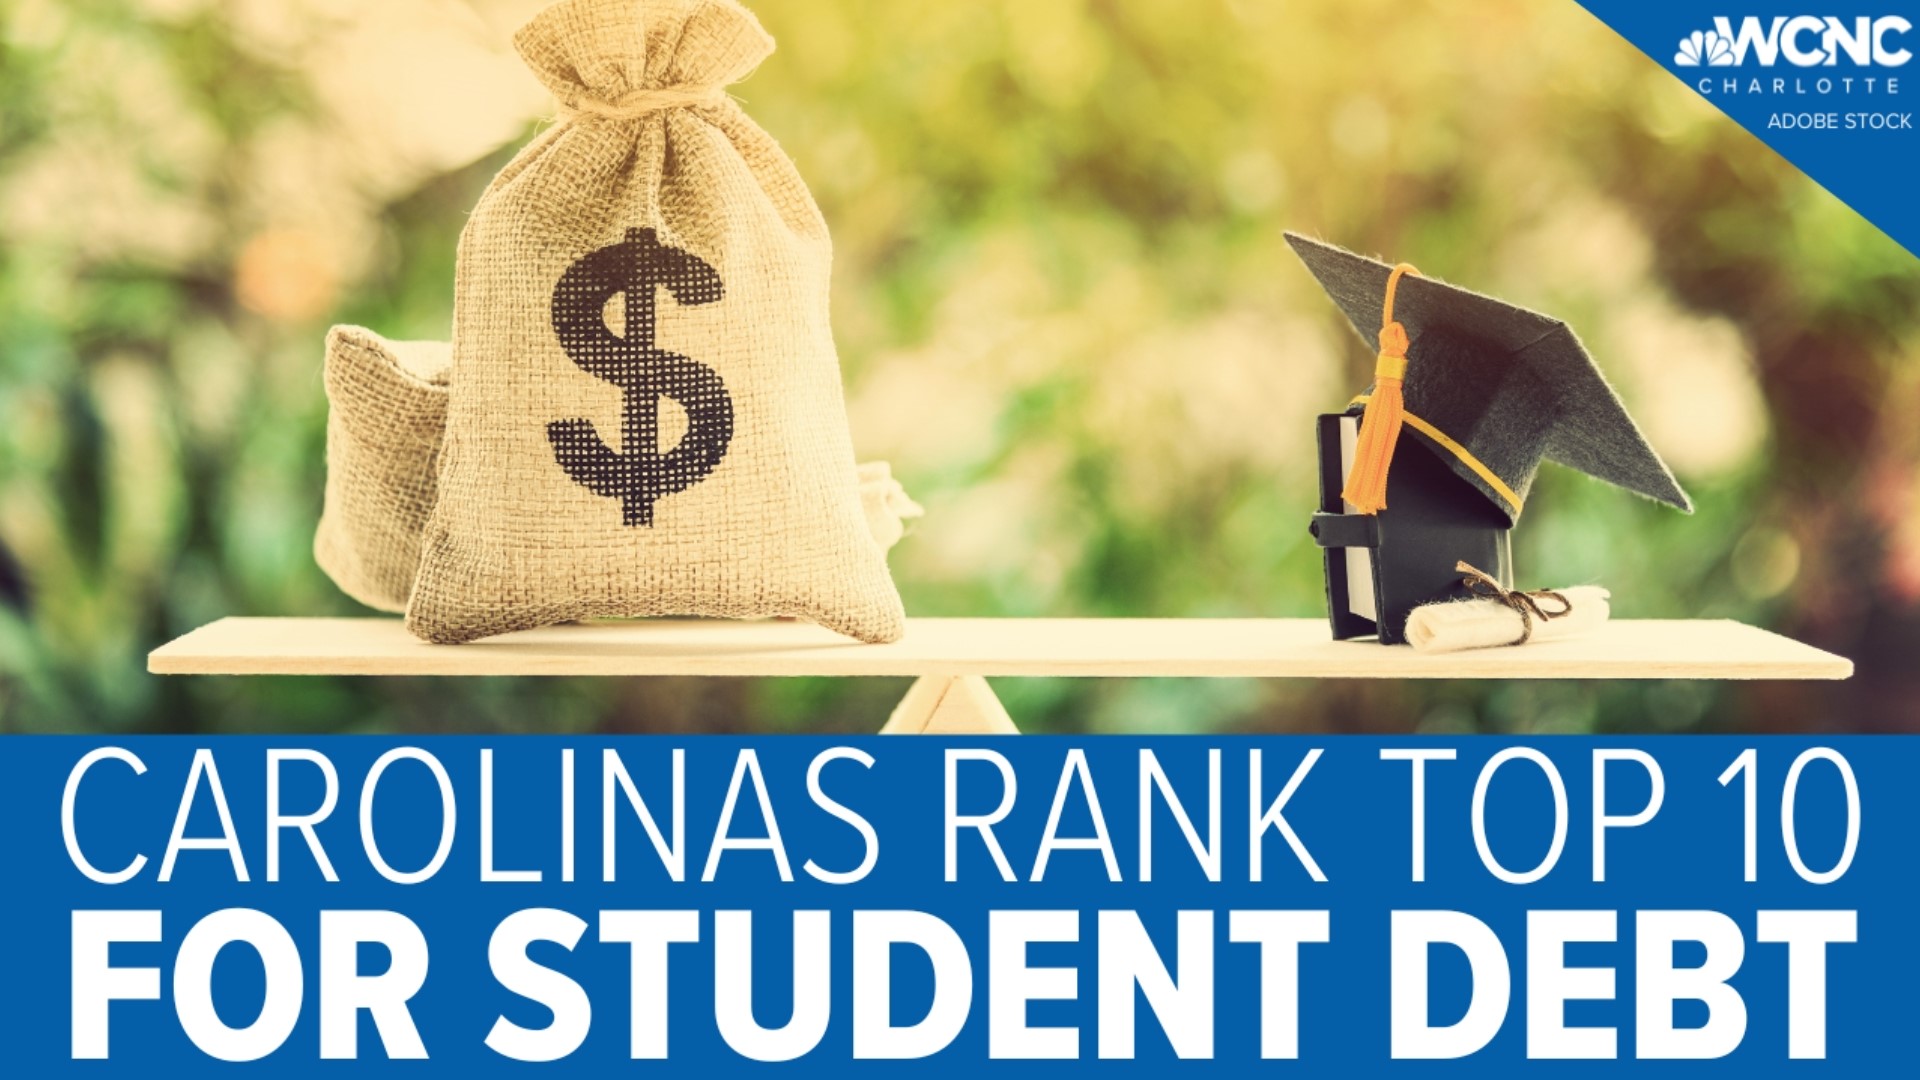 According to Scholaroo, a national team of scholarship experts, South Carolinians have the fourth highest student debt with $39,000 per borrower.